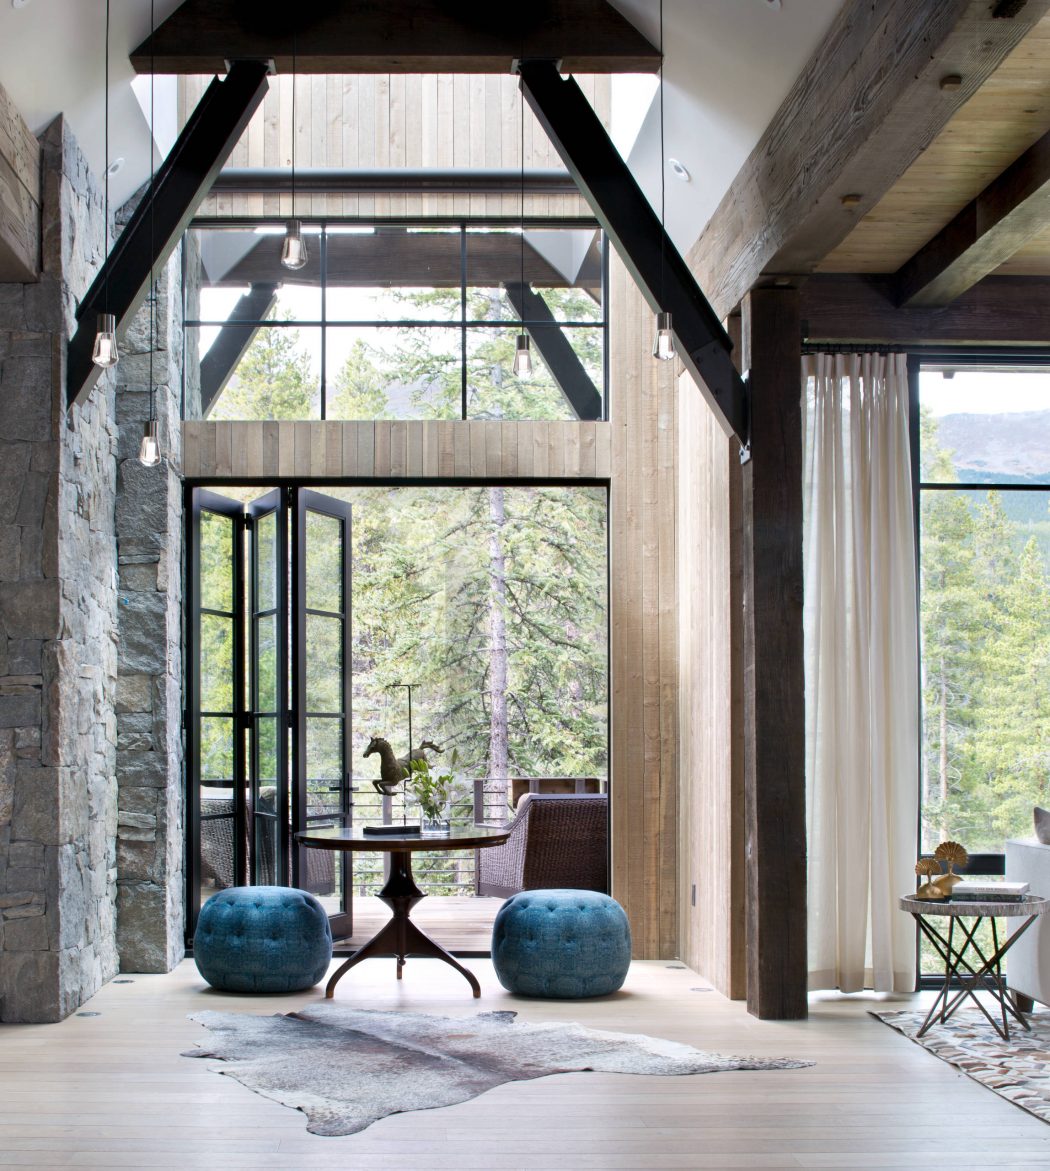 Rustic yet modern interior with wooden beams, large windows, and plush teal ottomans.